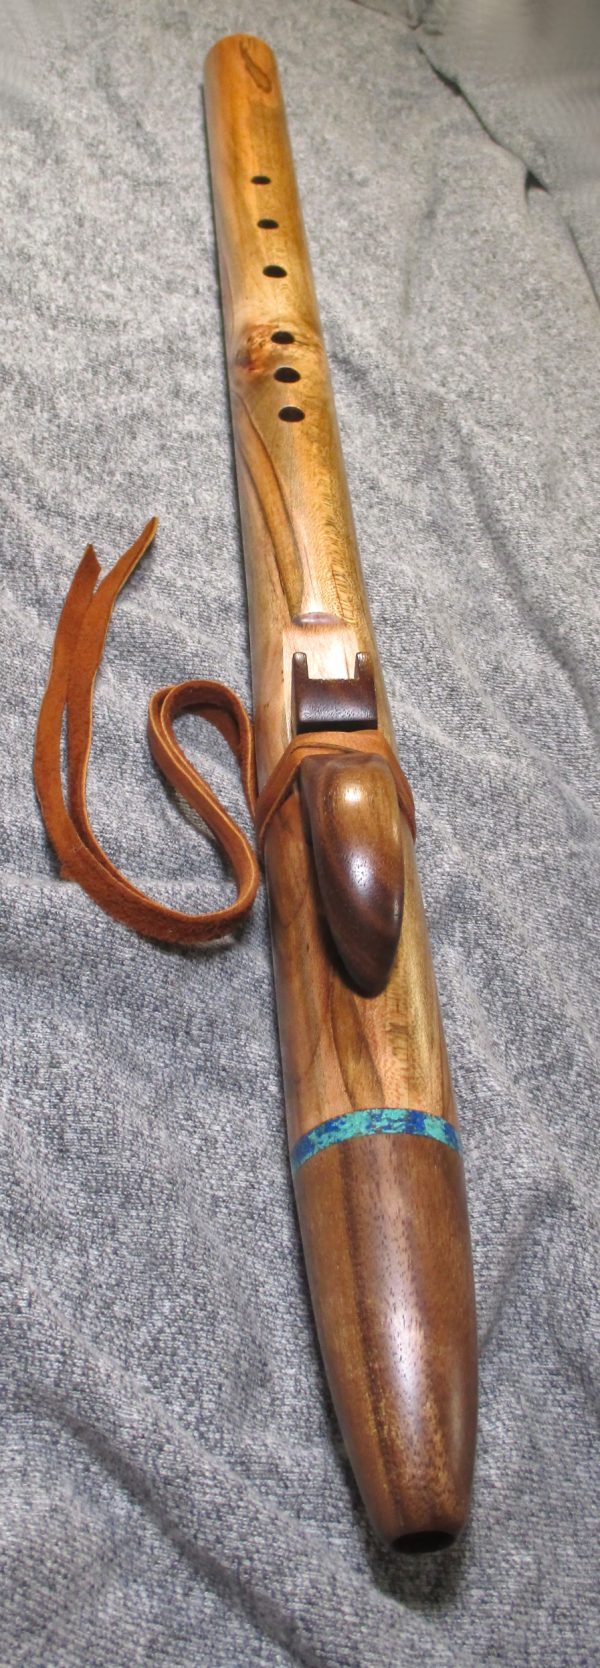 Native American style Flute 2 final